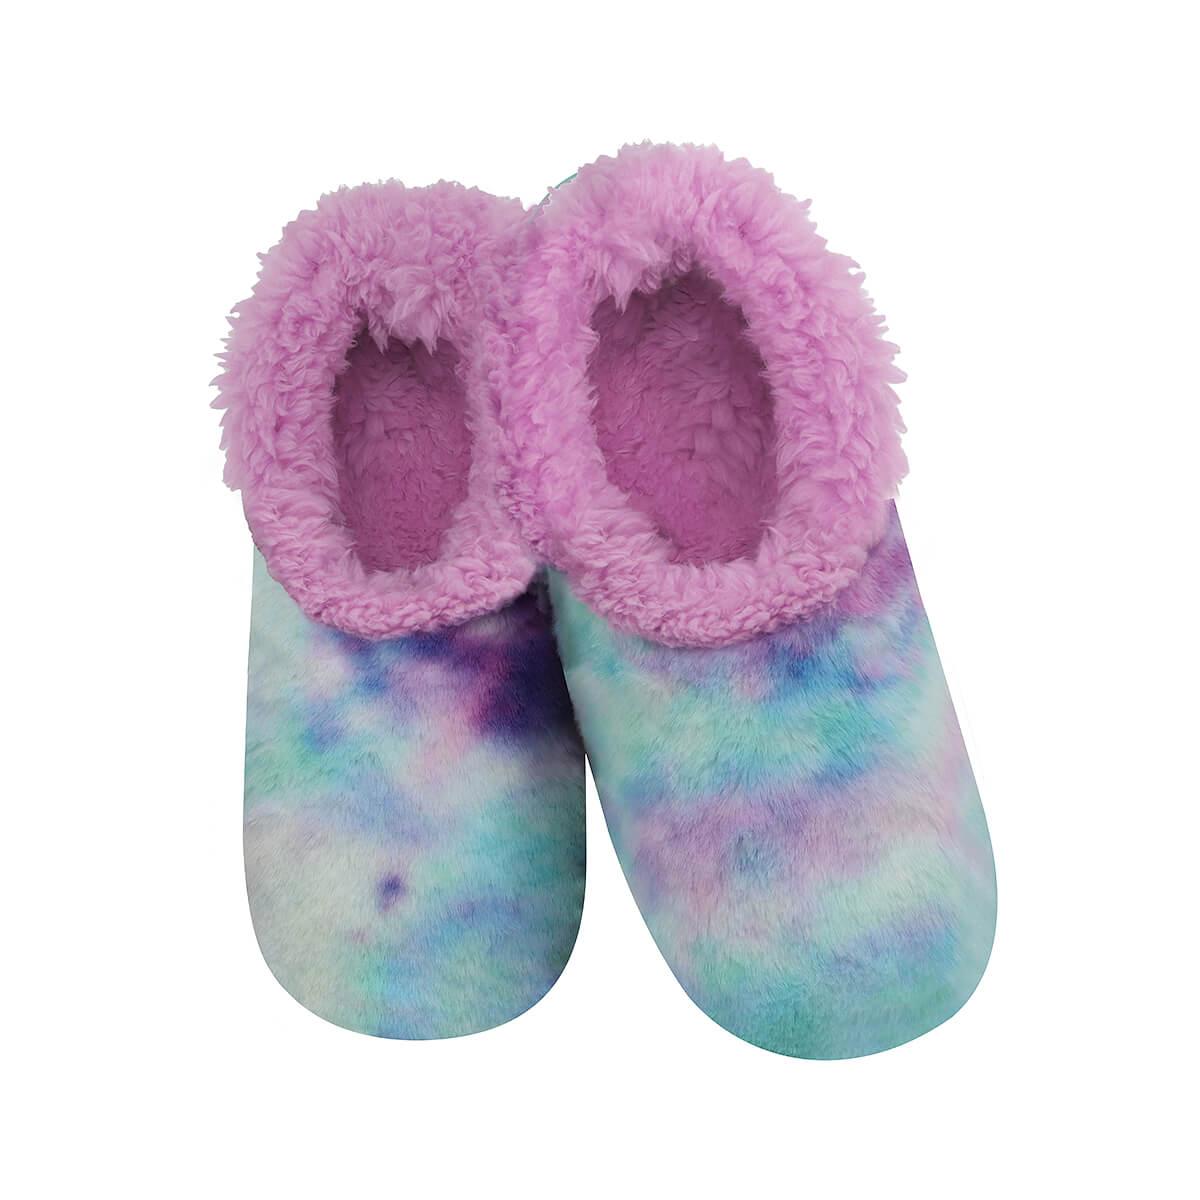  Kids ' Cotton Candy Tie Dye Snoozies Slippers